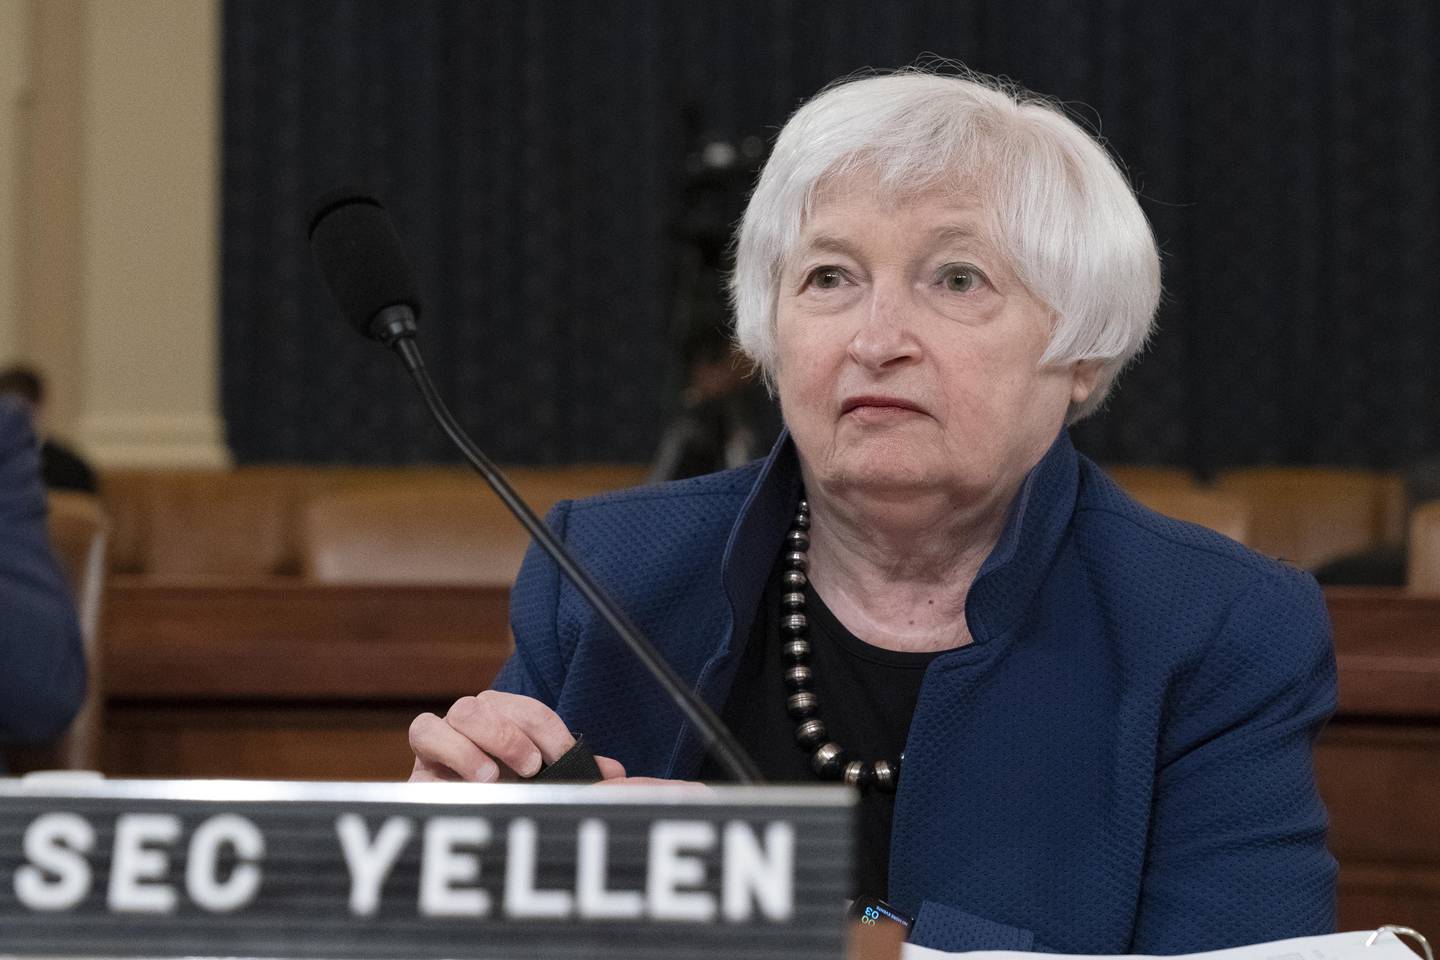 Treasury Secretary Janet Yellen speaks before the House Ways and Means Committee during a hearing this week. AP